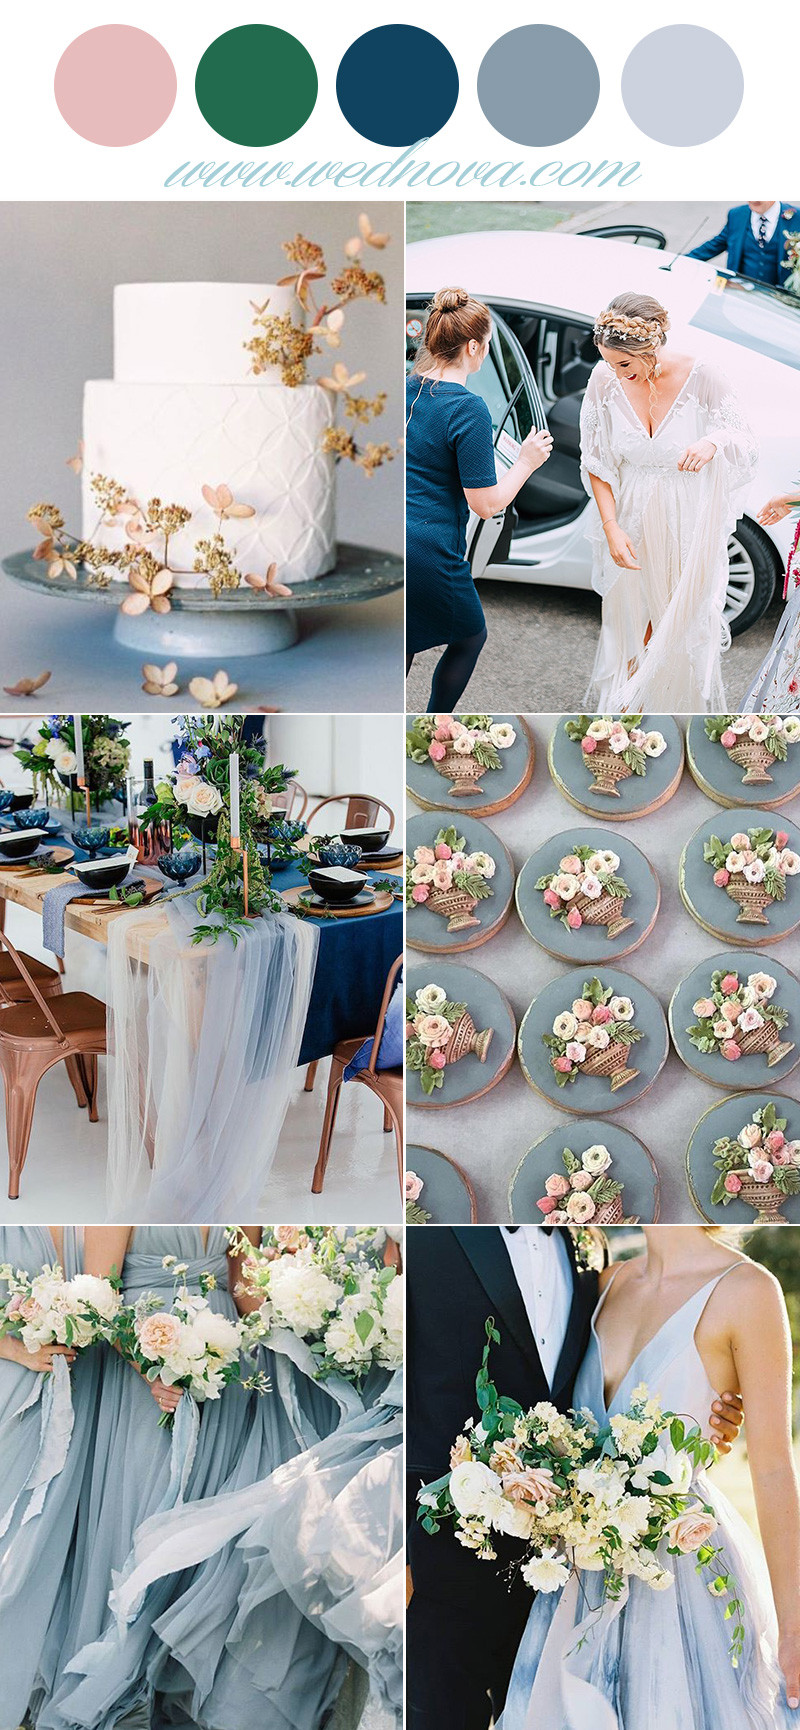 Wedding Color Pallets
 12 Wedding Color Palettes That Are Perfect for Spring